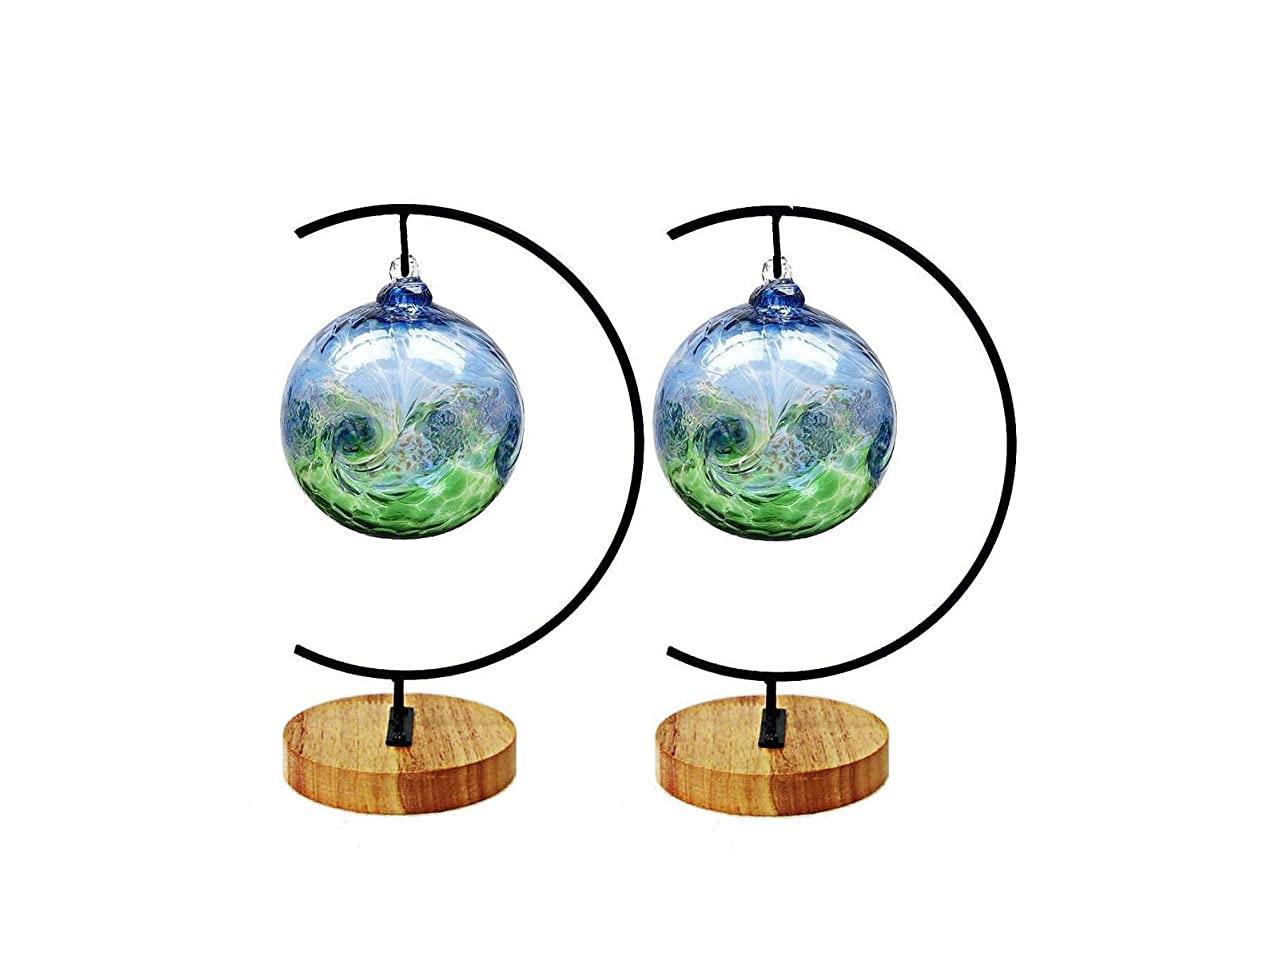 Christmas Ornament and Home Wedding Decoration Witch Ball Ornament Display Stand with Wood Flower Pot Stand Holder Iron Pothook Stand for Hanging Glass Globe Air Plant Terrarium 